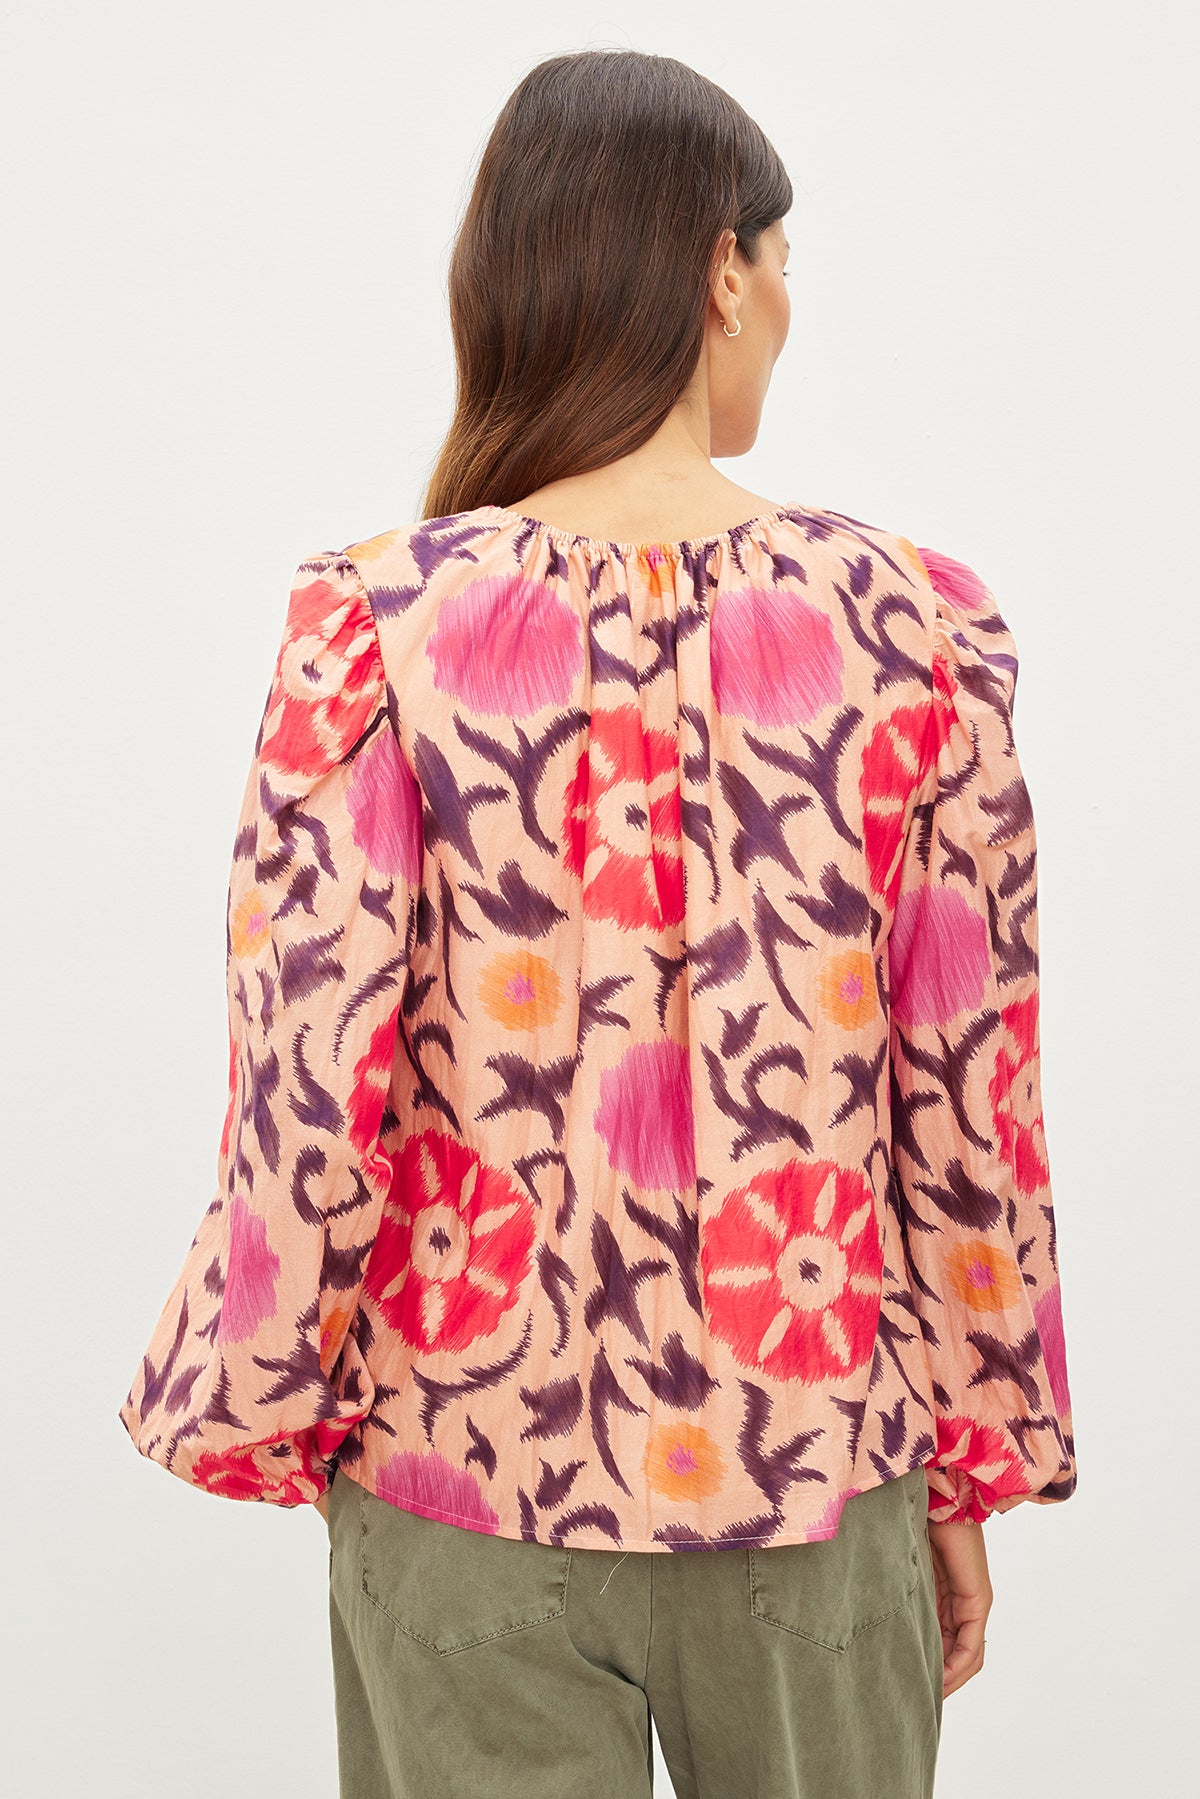 The back view of a woman wearing a Velvet by Graham & Spencer FRASER PRINTED SILK COTTON VOILE TOP.-35982328627393